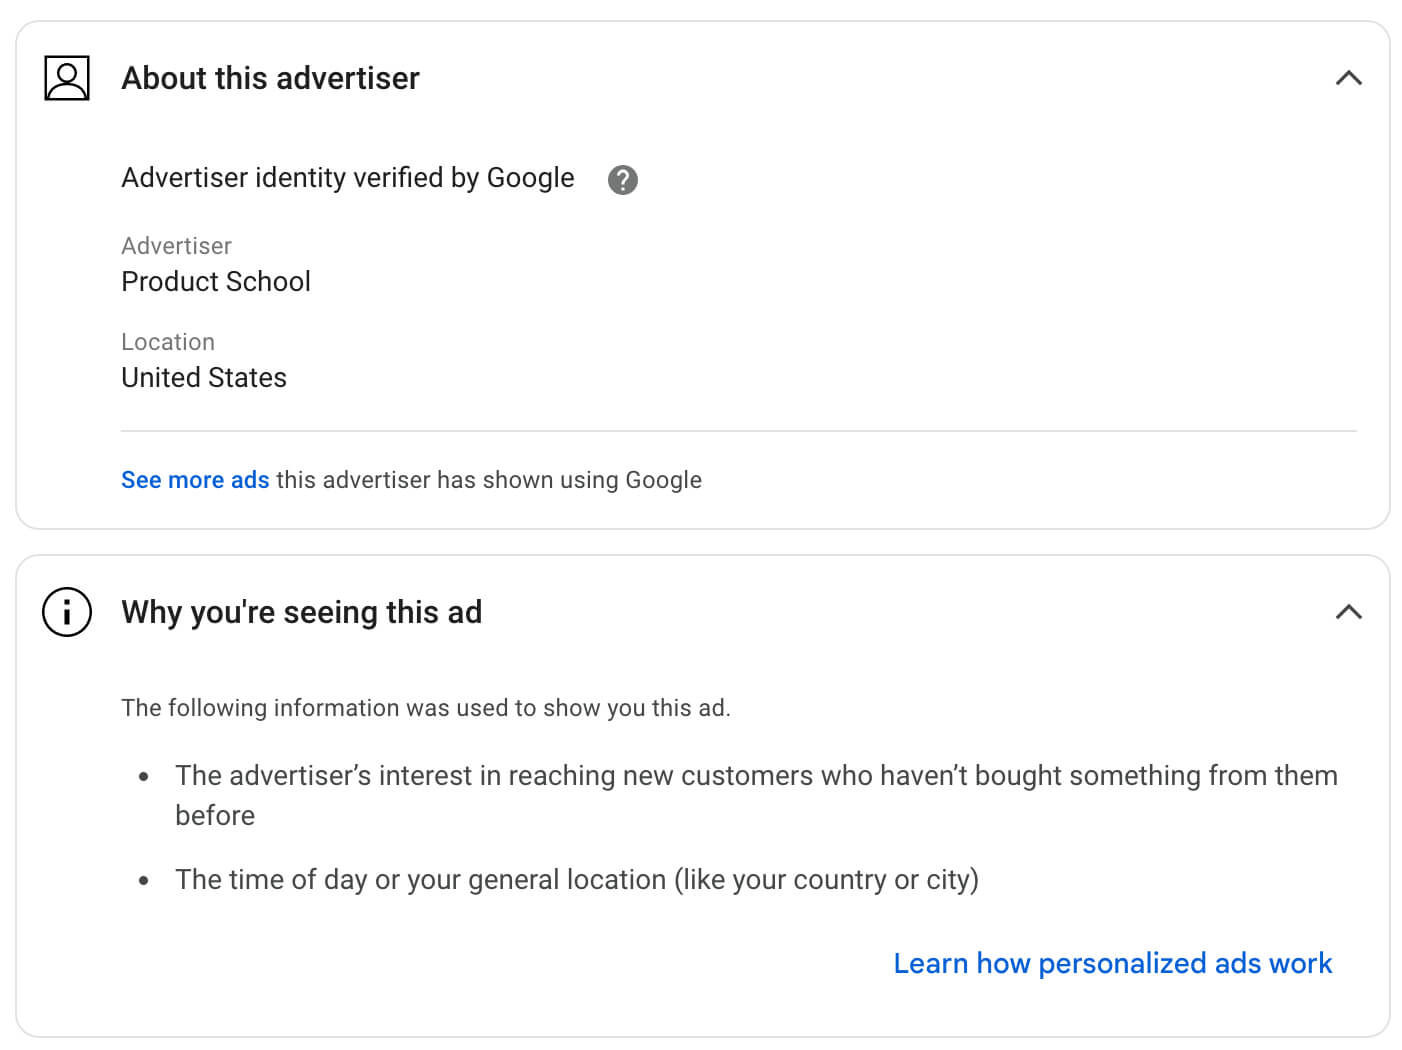 google-ads-transparency-center-about-this-advertiser-product-school-targeting-new-customers-13